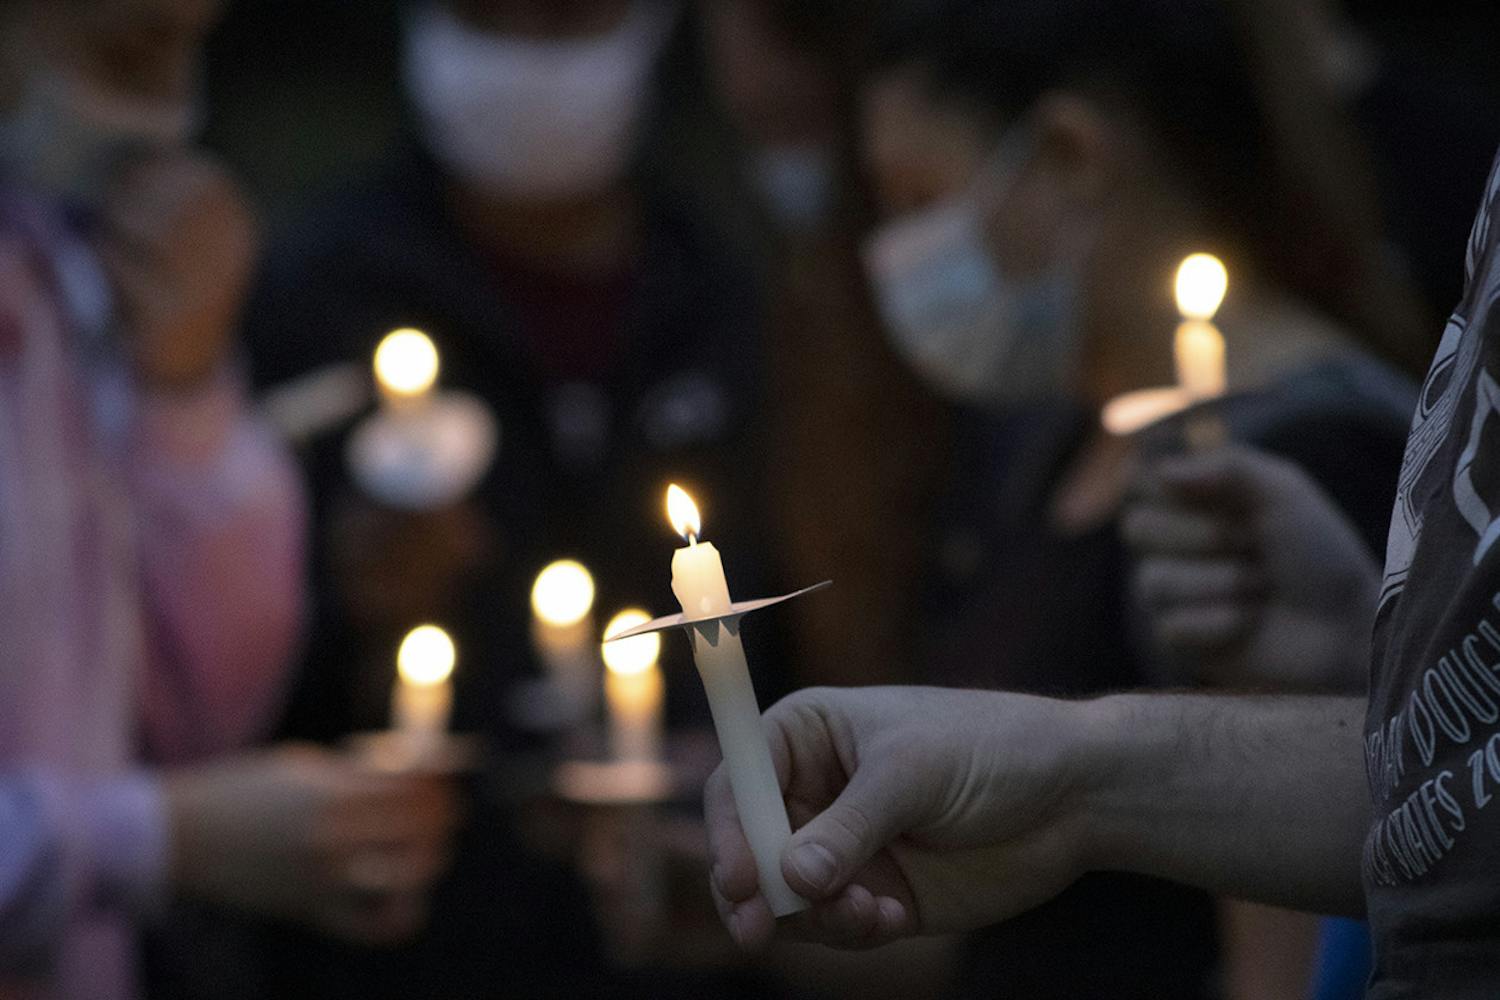 About 80 people hold candles and gather during a vigil on Sunday, Feb. 14, 2021 for those killed in the Marjory Stoneman Douglas High School shooting three years ago.